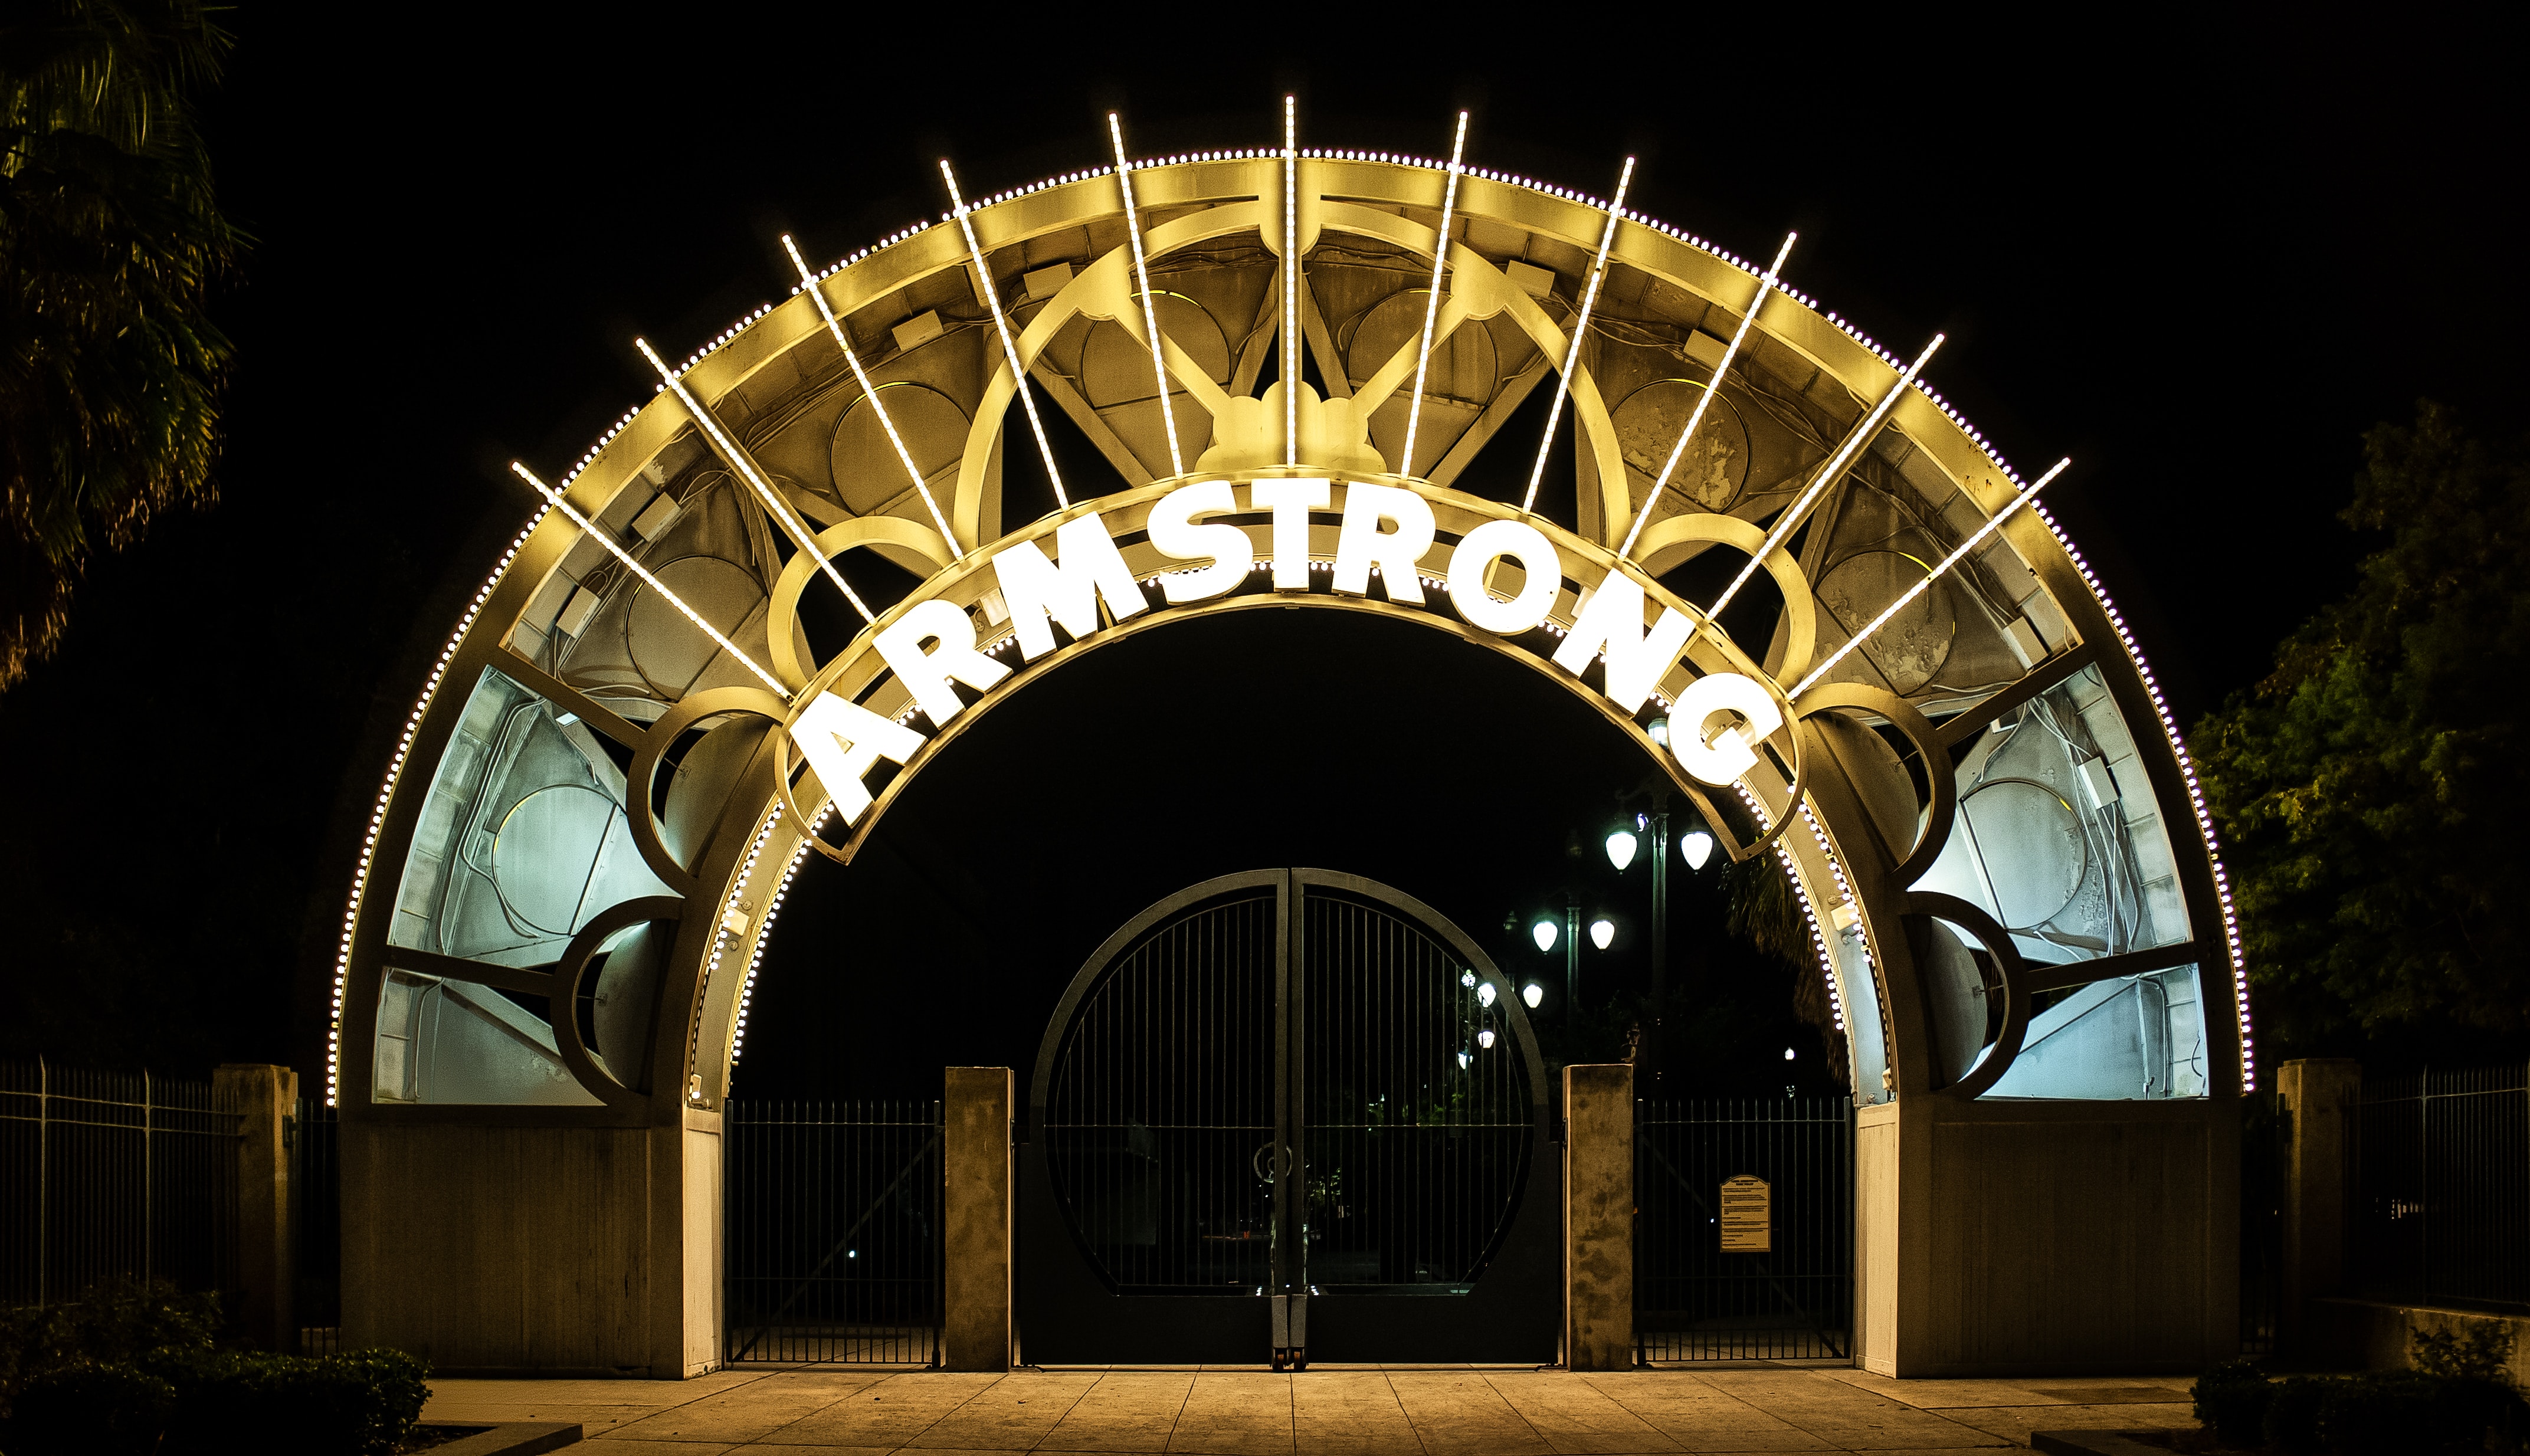 An illuminated archway to Louis Armstrong Park, located in New Orleans, Lousiana